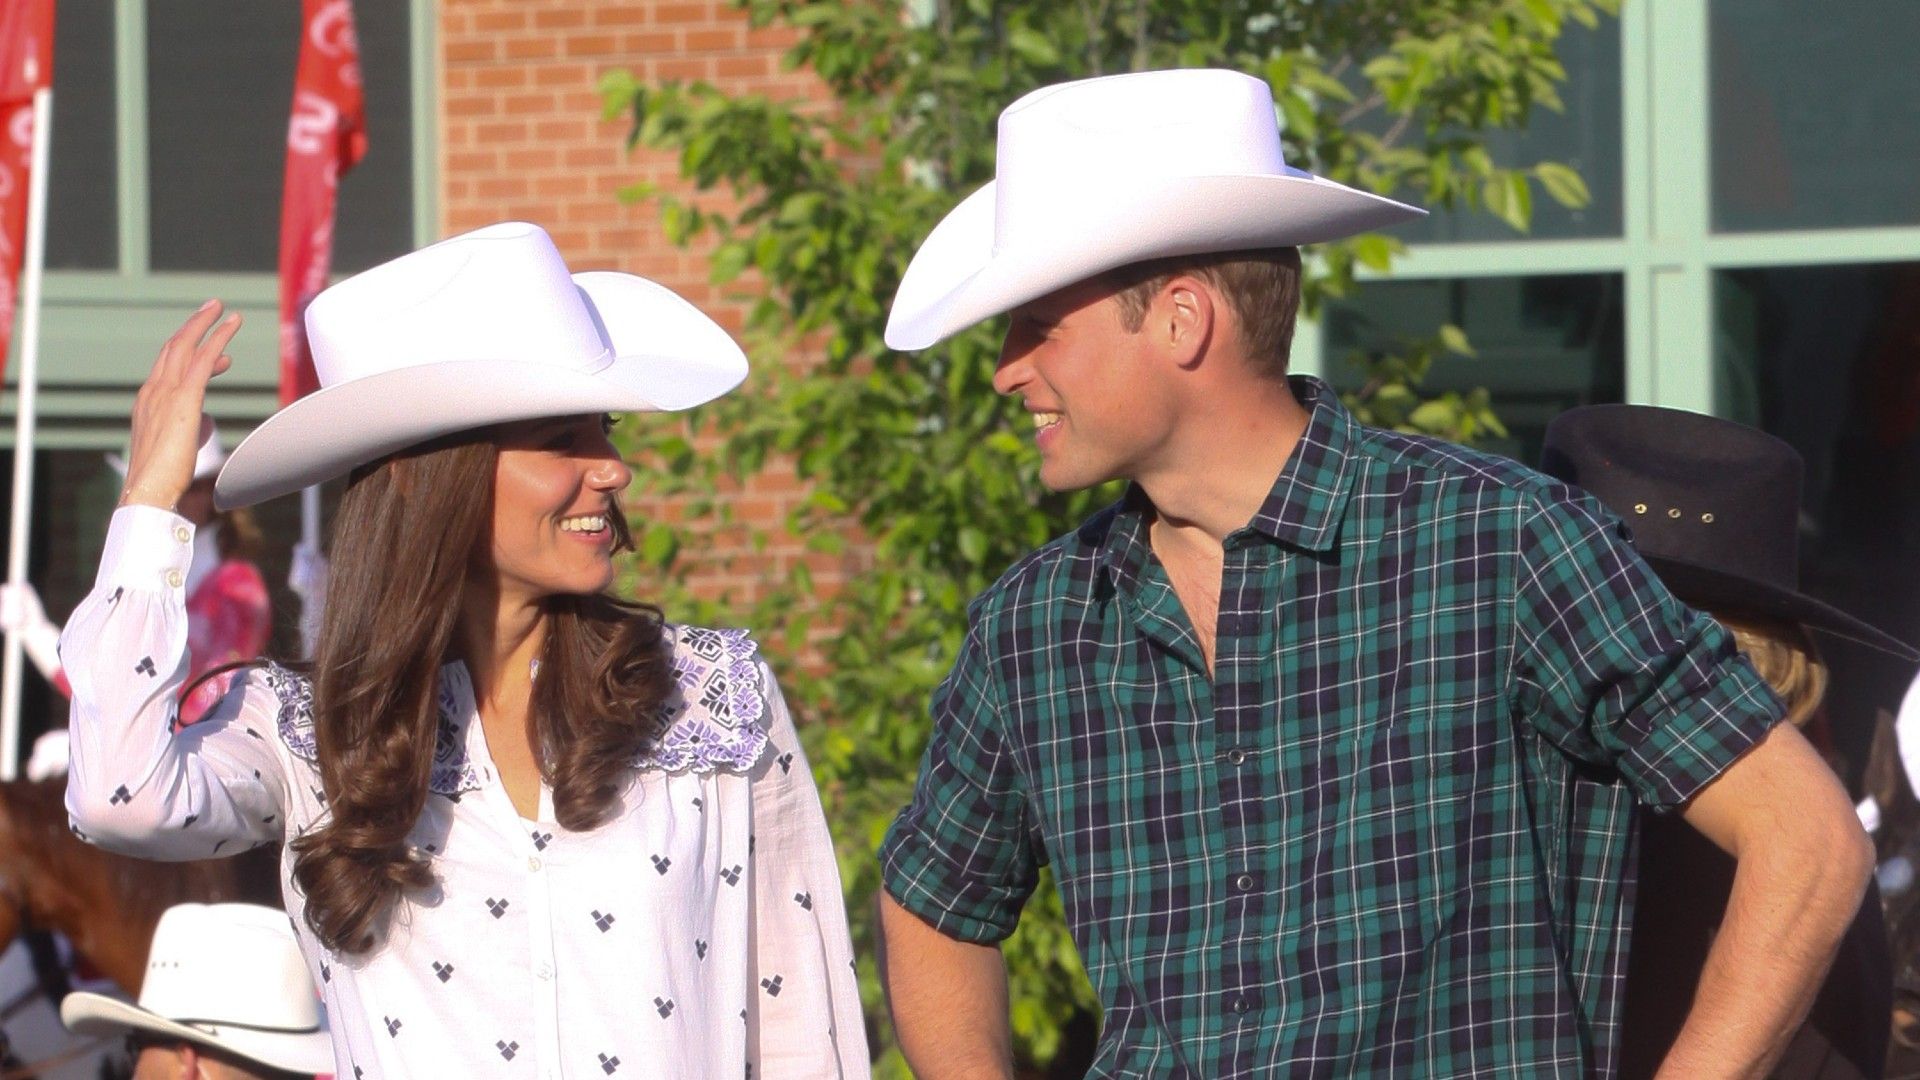 <p>                     While we've come to expect many a jaw-dropping style moment from Kate Middleton, we never quite expected her and Prince William to Go Wild West.                   </p>                                      <p>                     The royal couple sported white cowboy hats and western wear in downtown Calgary for a bull riding demonstration during their first royal tour together in 2011.                   </p>                                      <p>                     Cutting casual figures in denim jeans and white shirts, William joked at the time, "Well, this is different,” perfecting his gesture with a classic tip of the cowboy hat.                   </p>